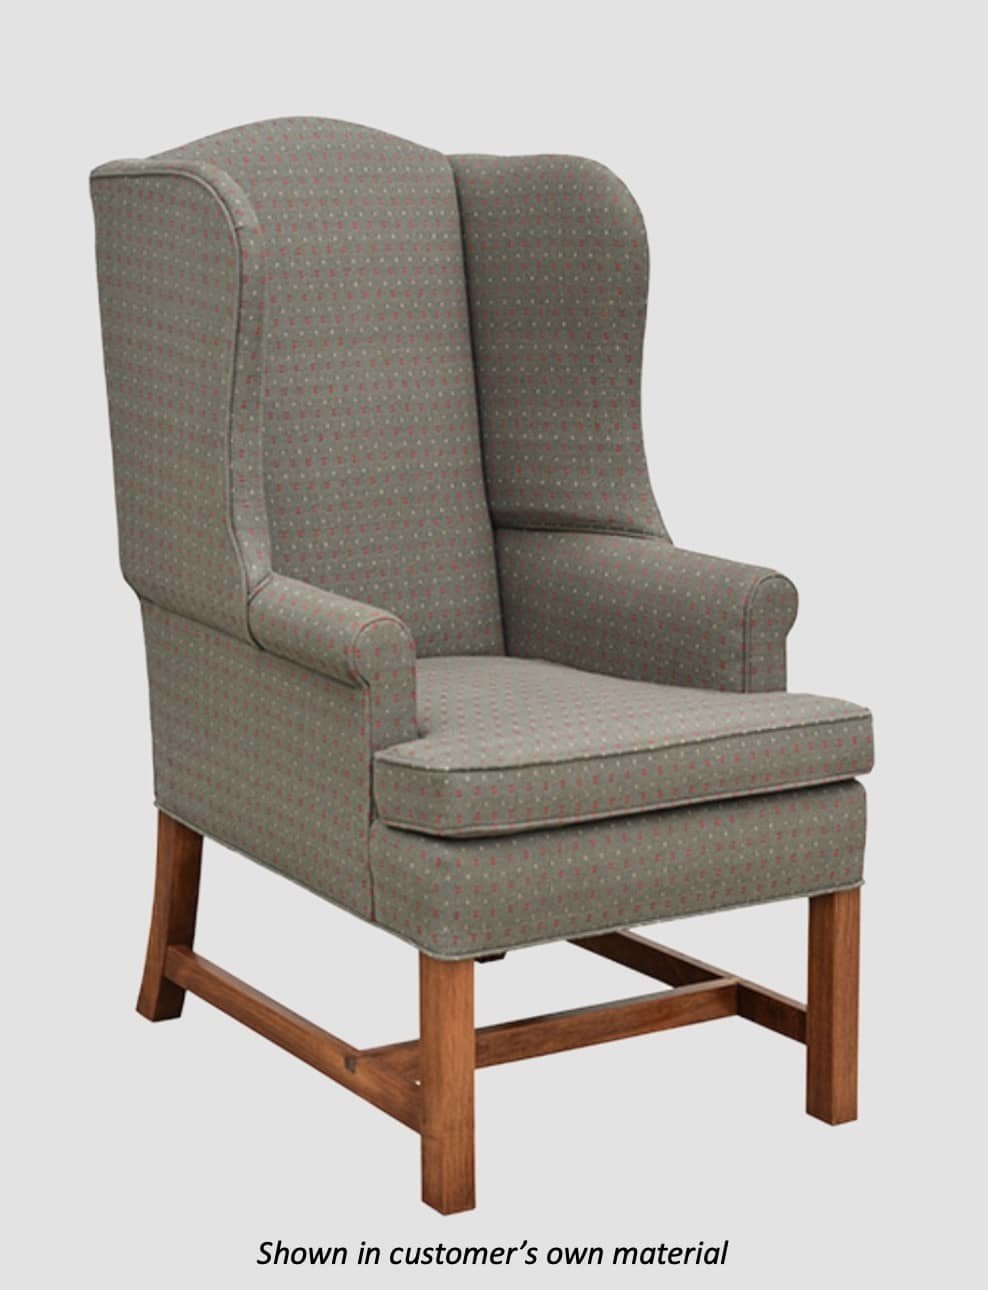 Town & Country Furnishings Hearthside Chair from the American Primitive Collection